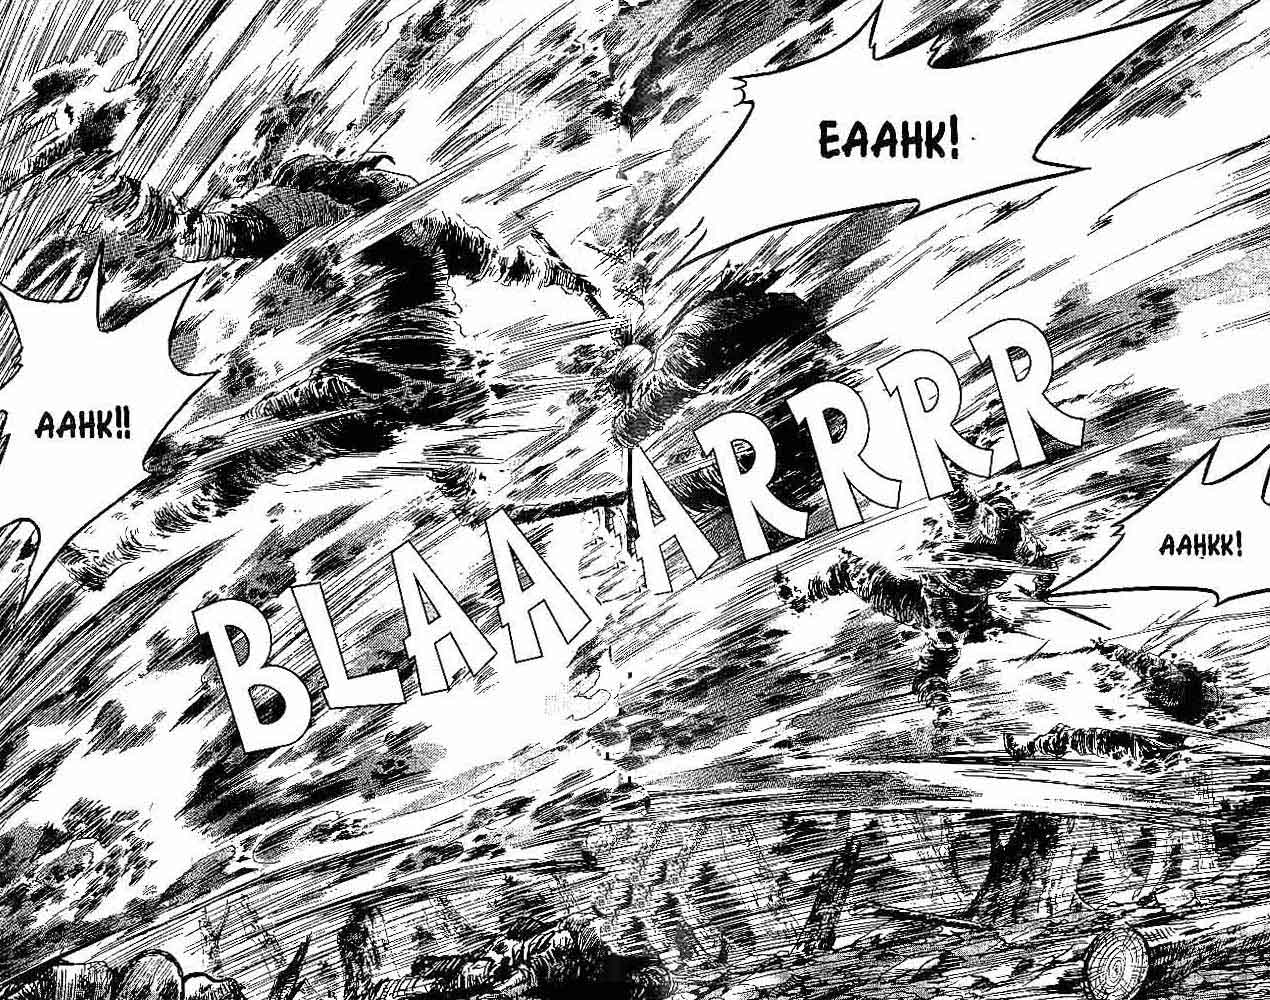 Ruler of the Land Chapter 38 (Volume)